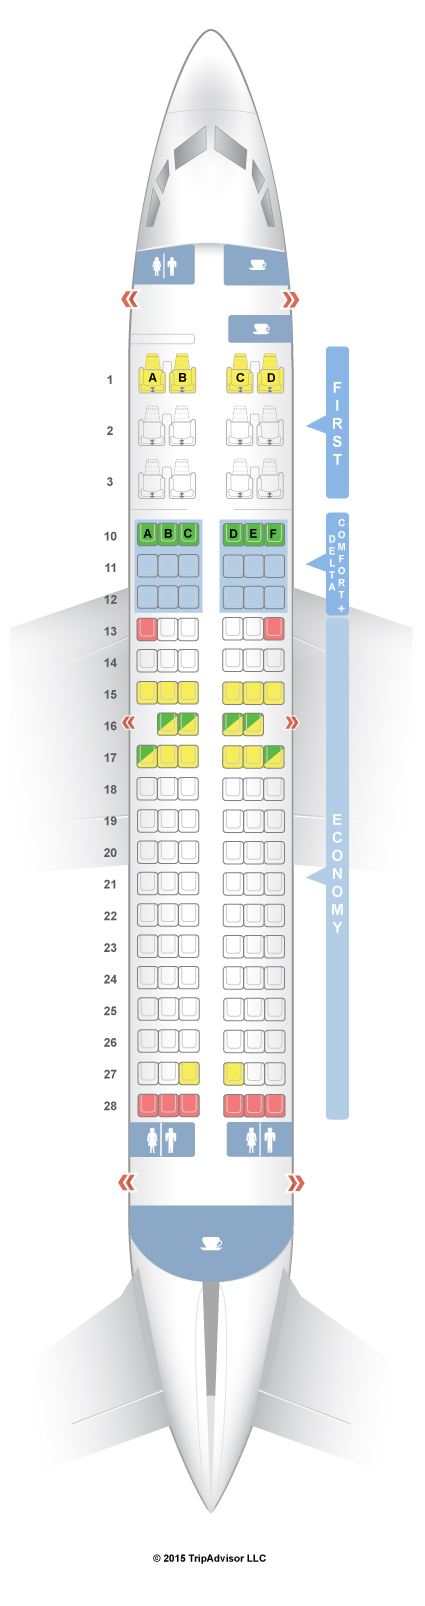 Delta Md 88 Seating Chart